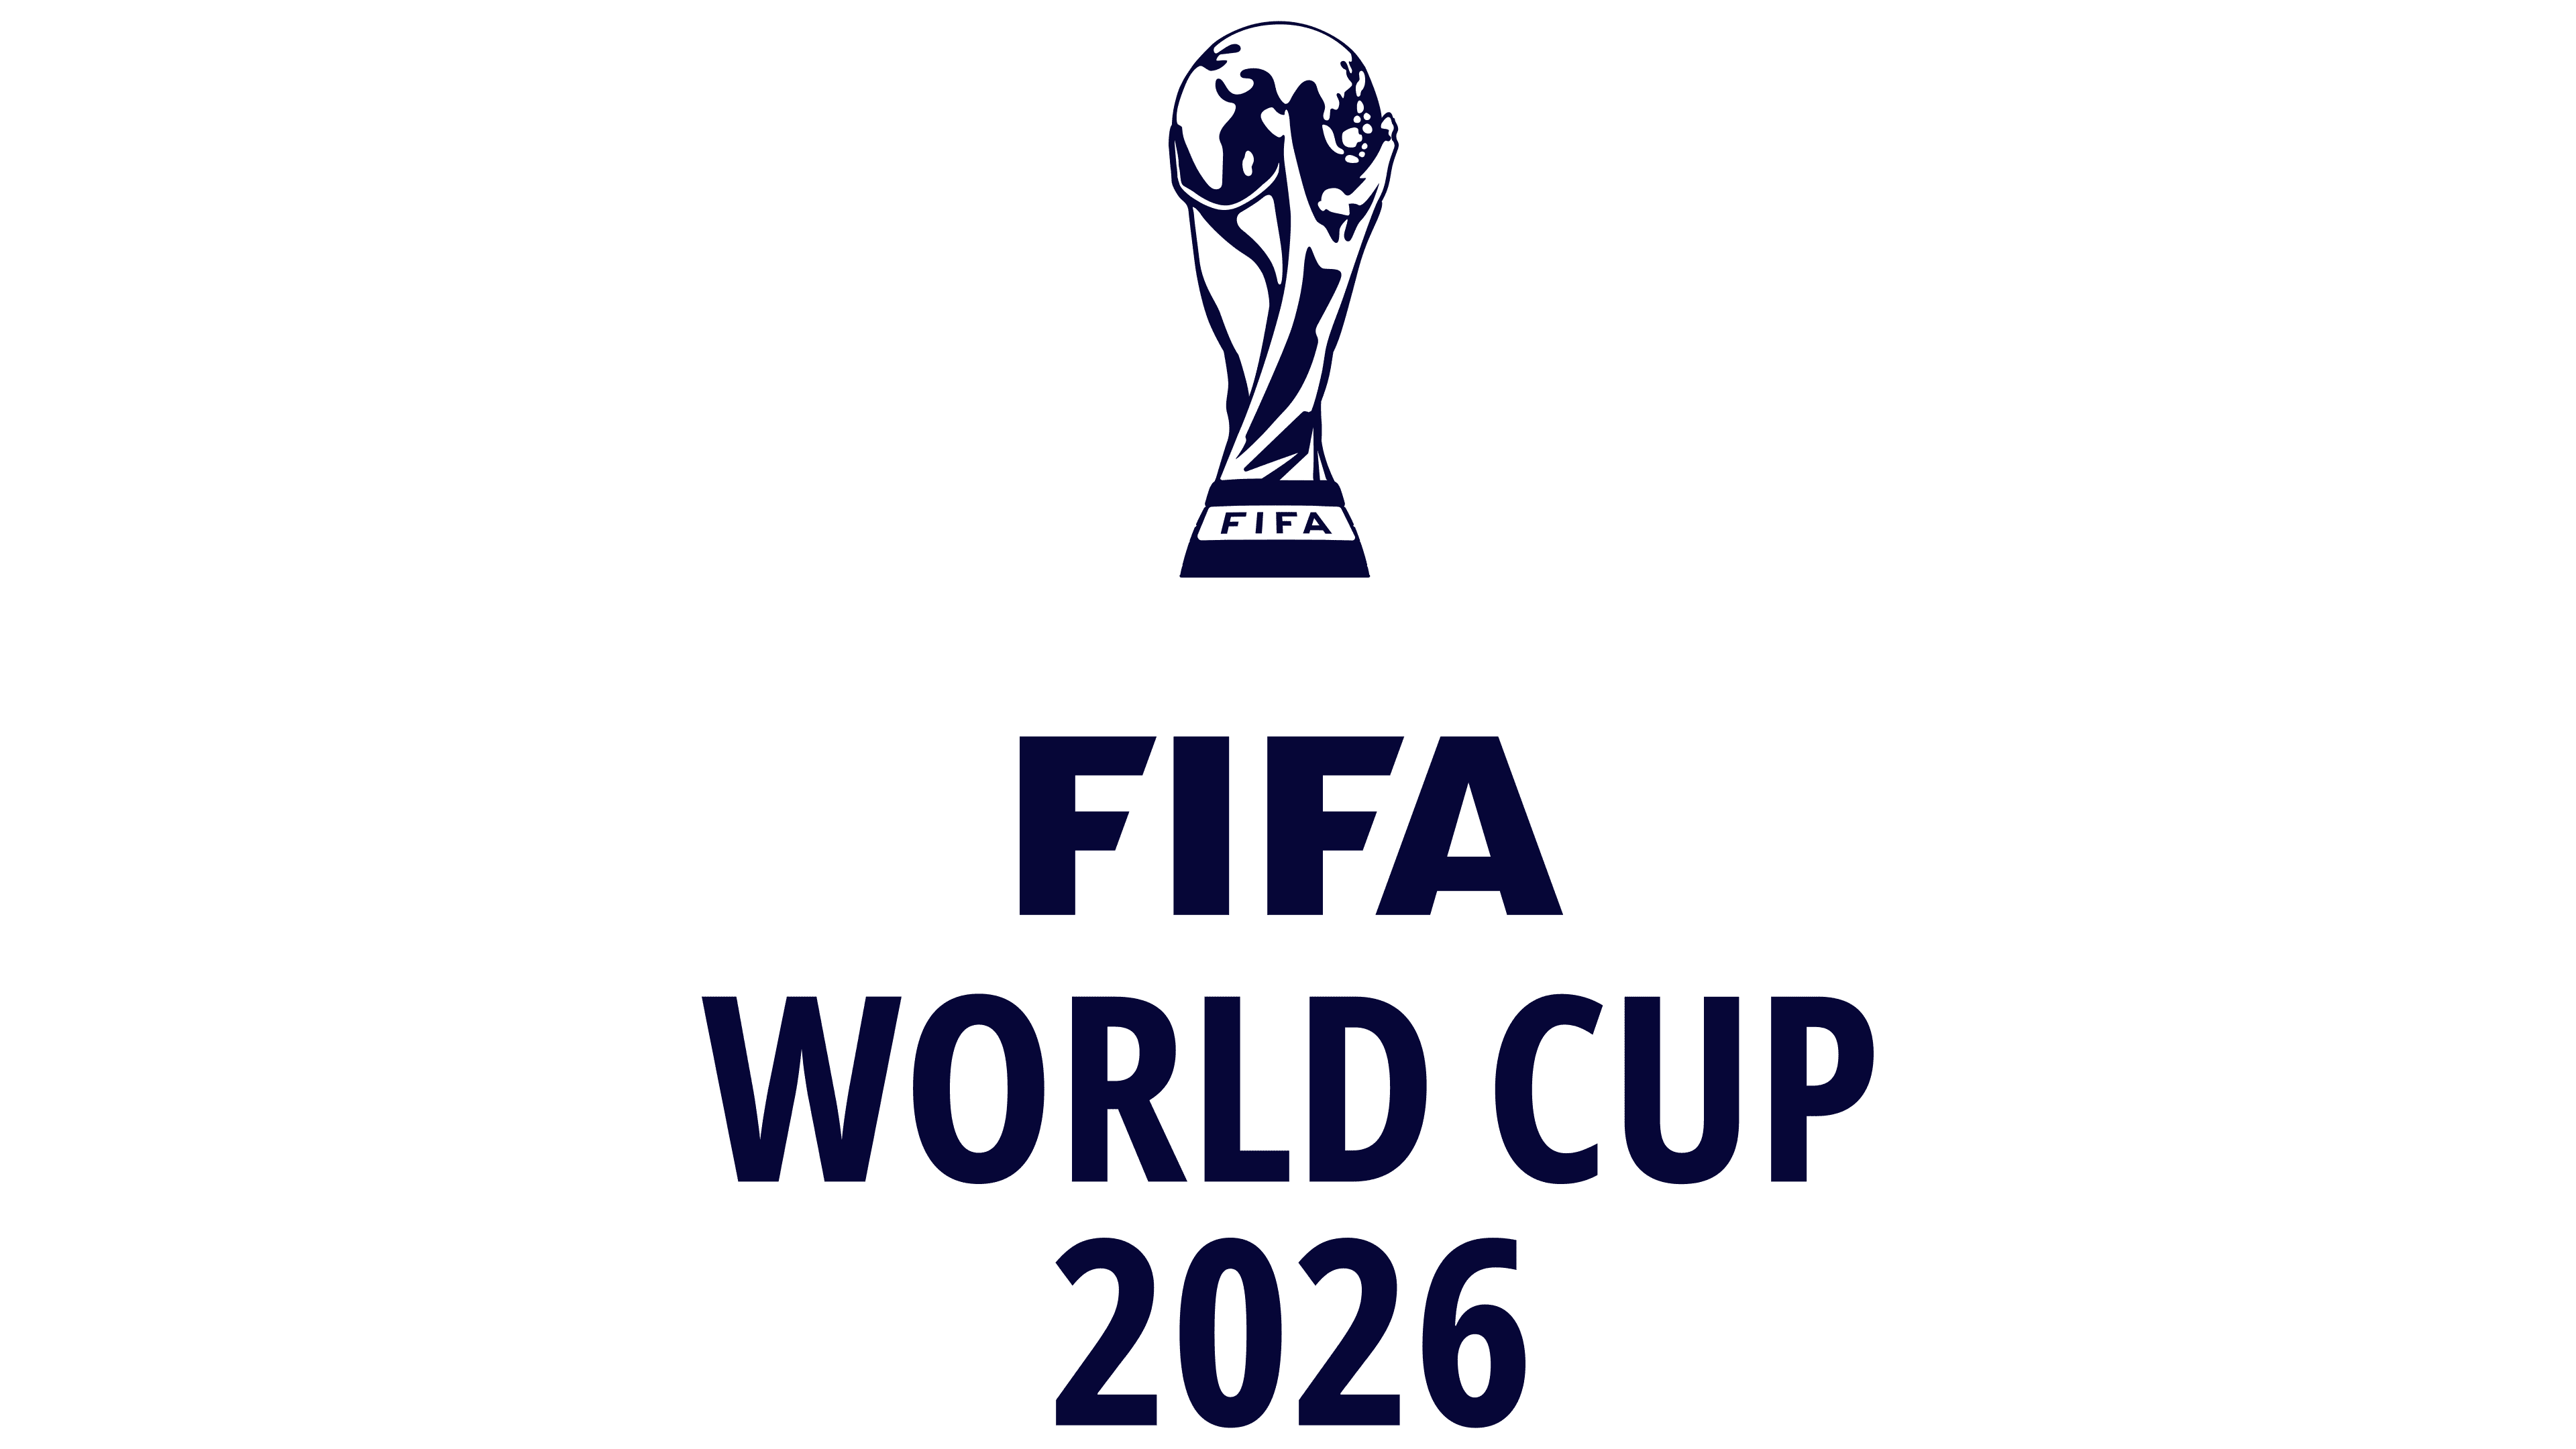 FIFA World Cup Logo And Symbol, Meaning, History, PNG,, 45% OFF